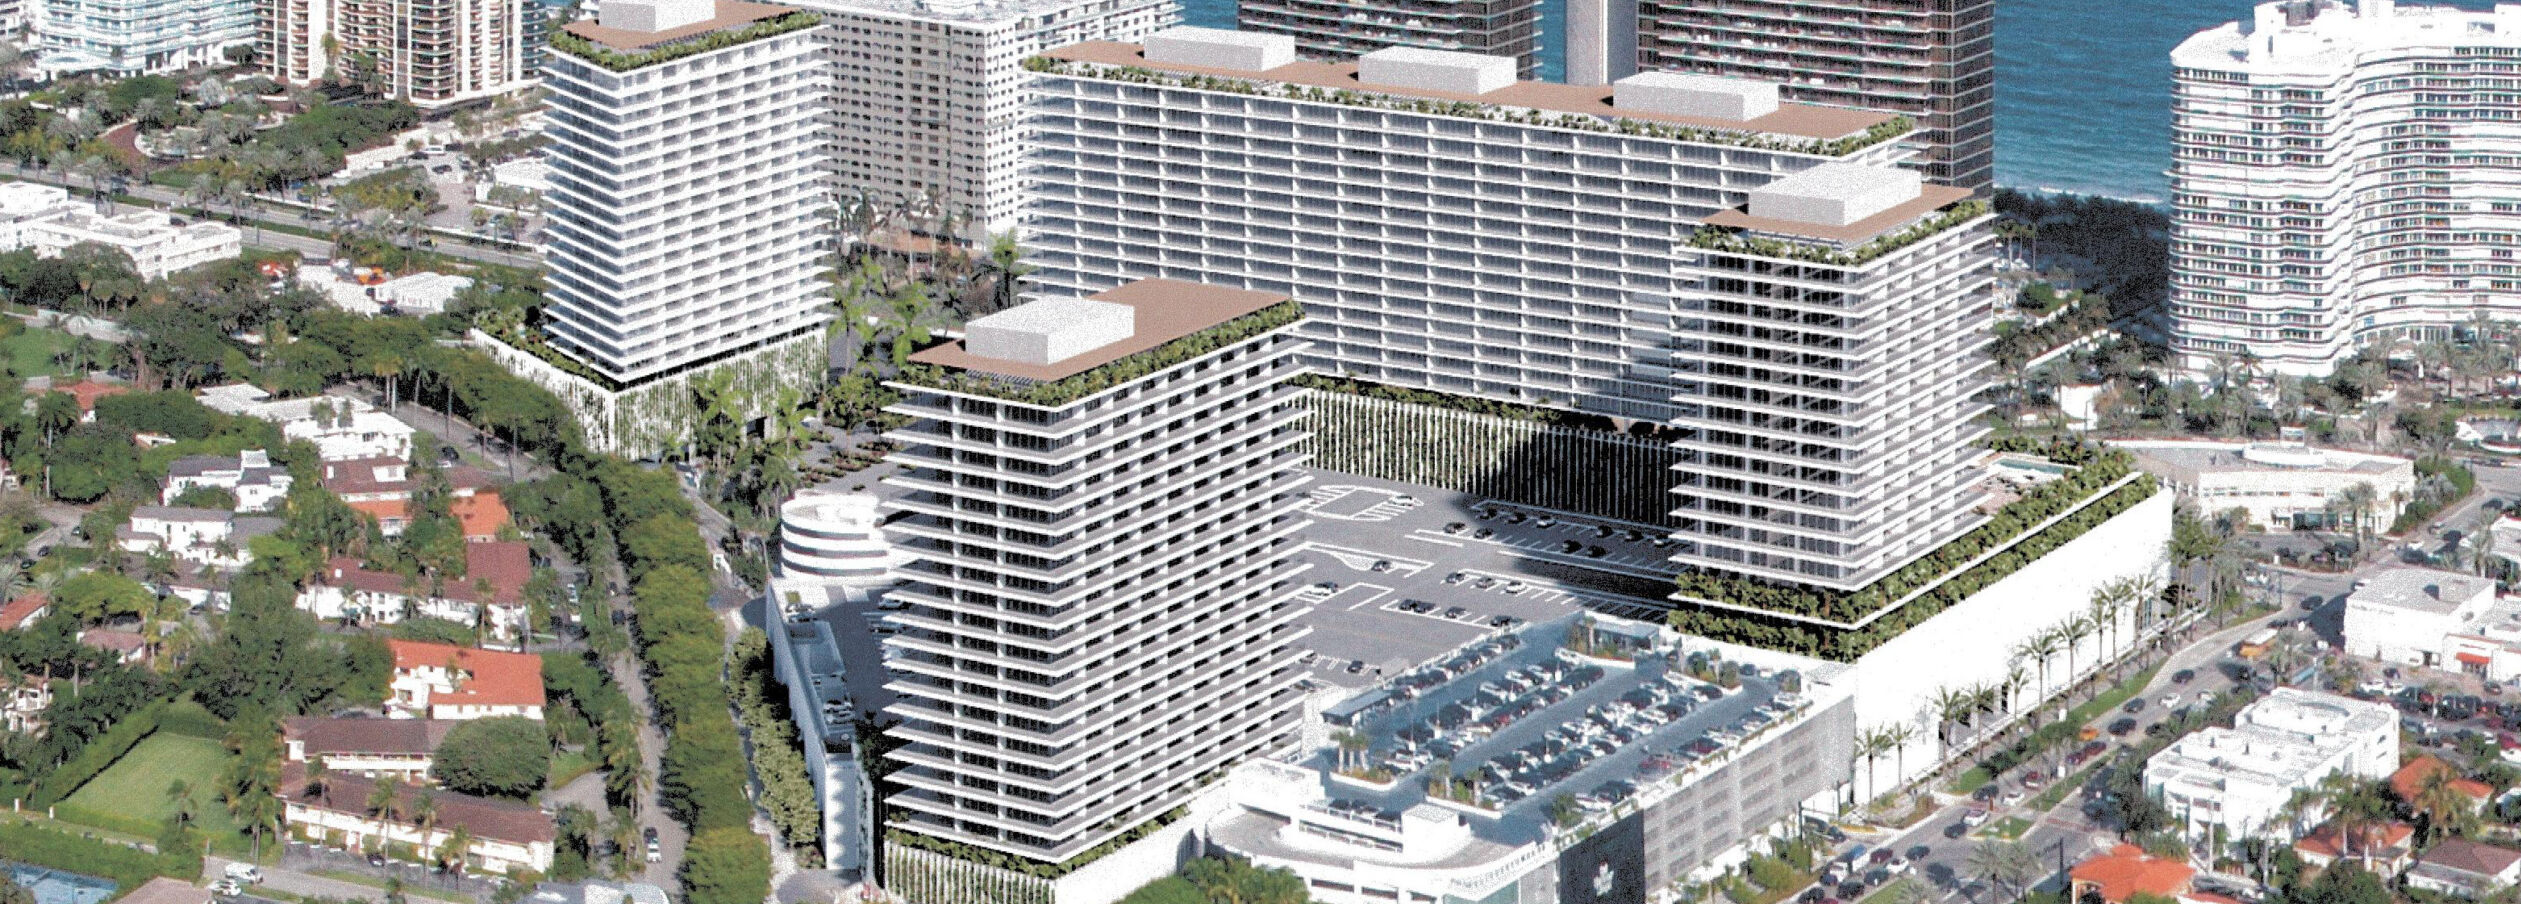 Image of Bal Harbour Shops Proposed Expansion